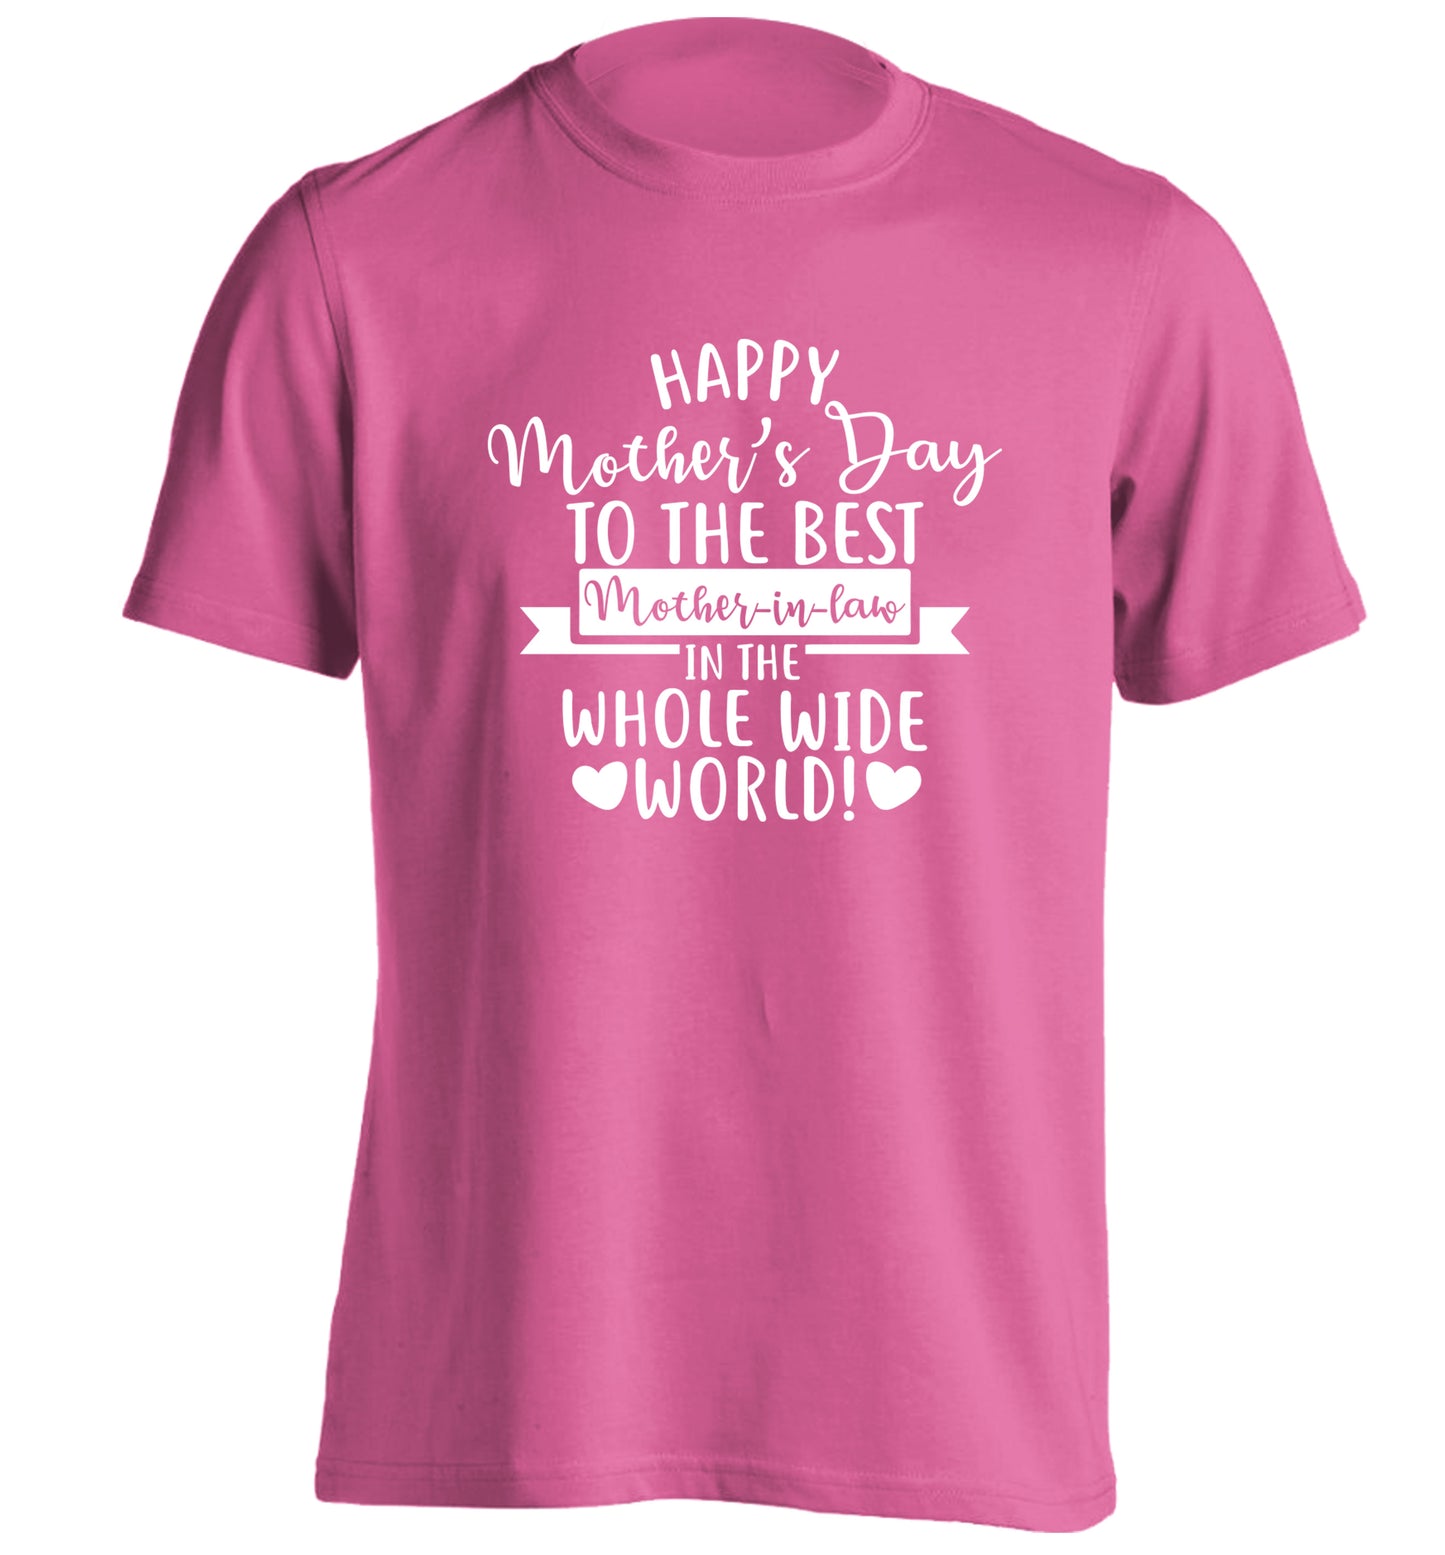 Happy mother's day to the best mother-in-law in the world adults unisex pink Tshirt 2XL